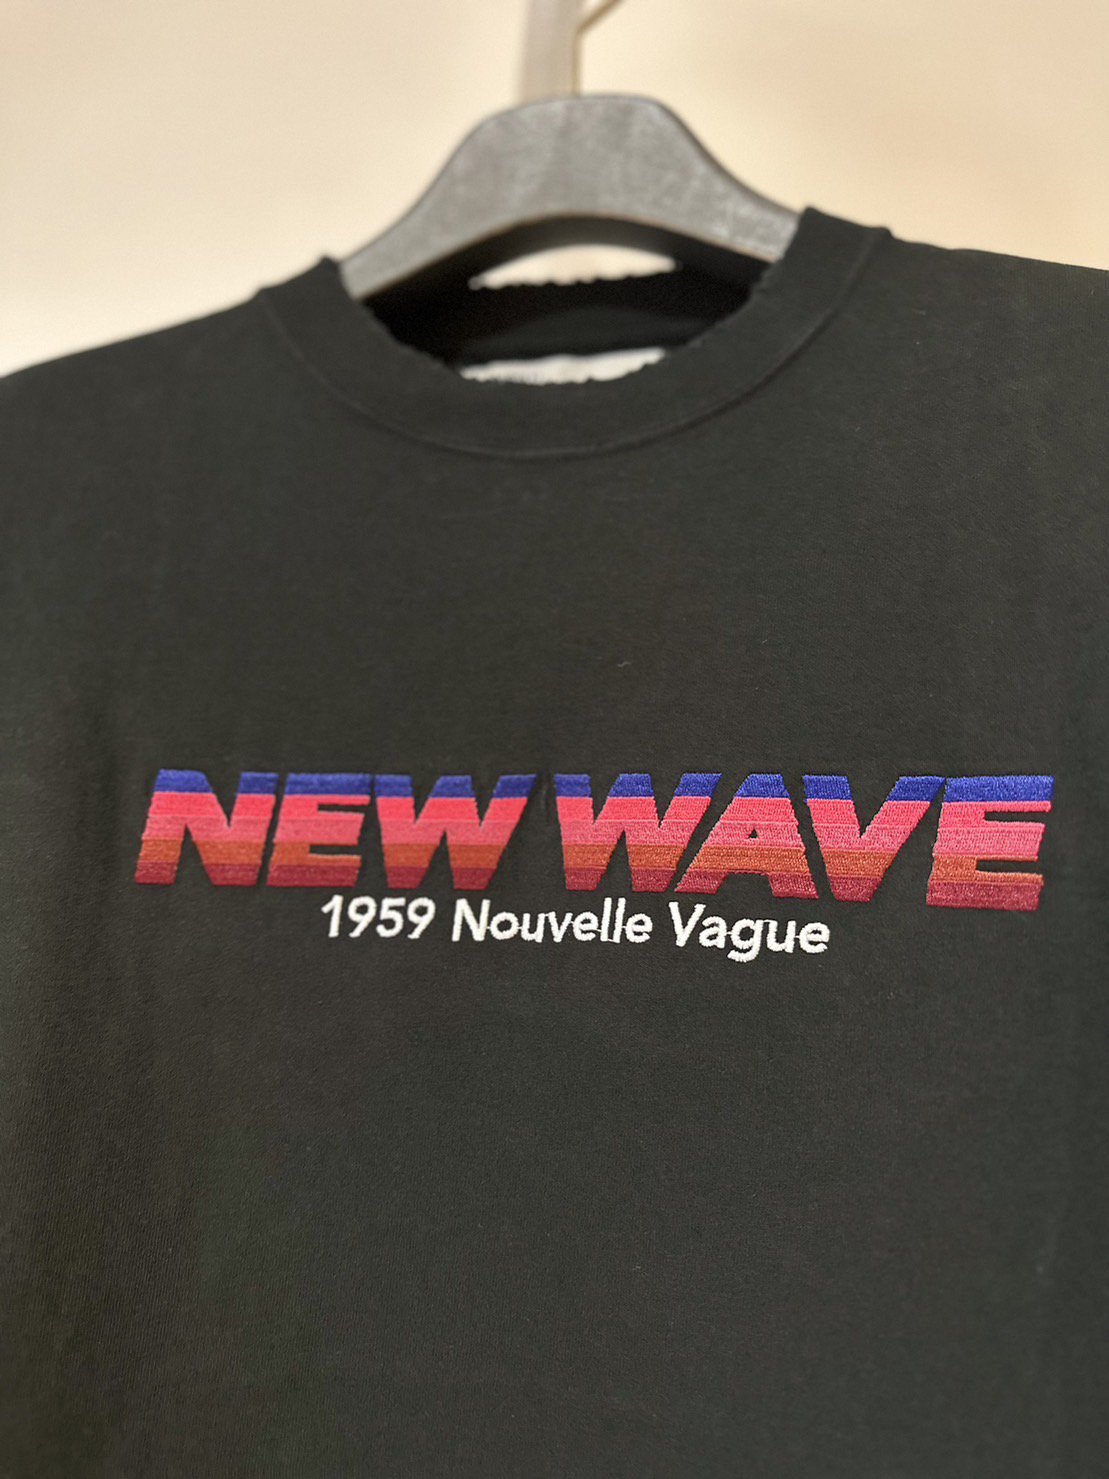 DAIRIKU<br />NEW WAVE Tee / Black <img class='new_mark_img2' src='https://img.shop-pro.jp/img/new/icons14.gif' style='border:none;display:inline;margin:0px;padding:0px;width:auto;' />